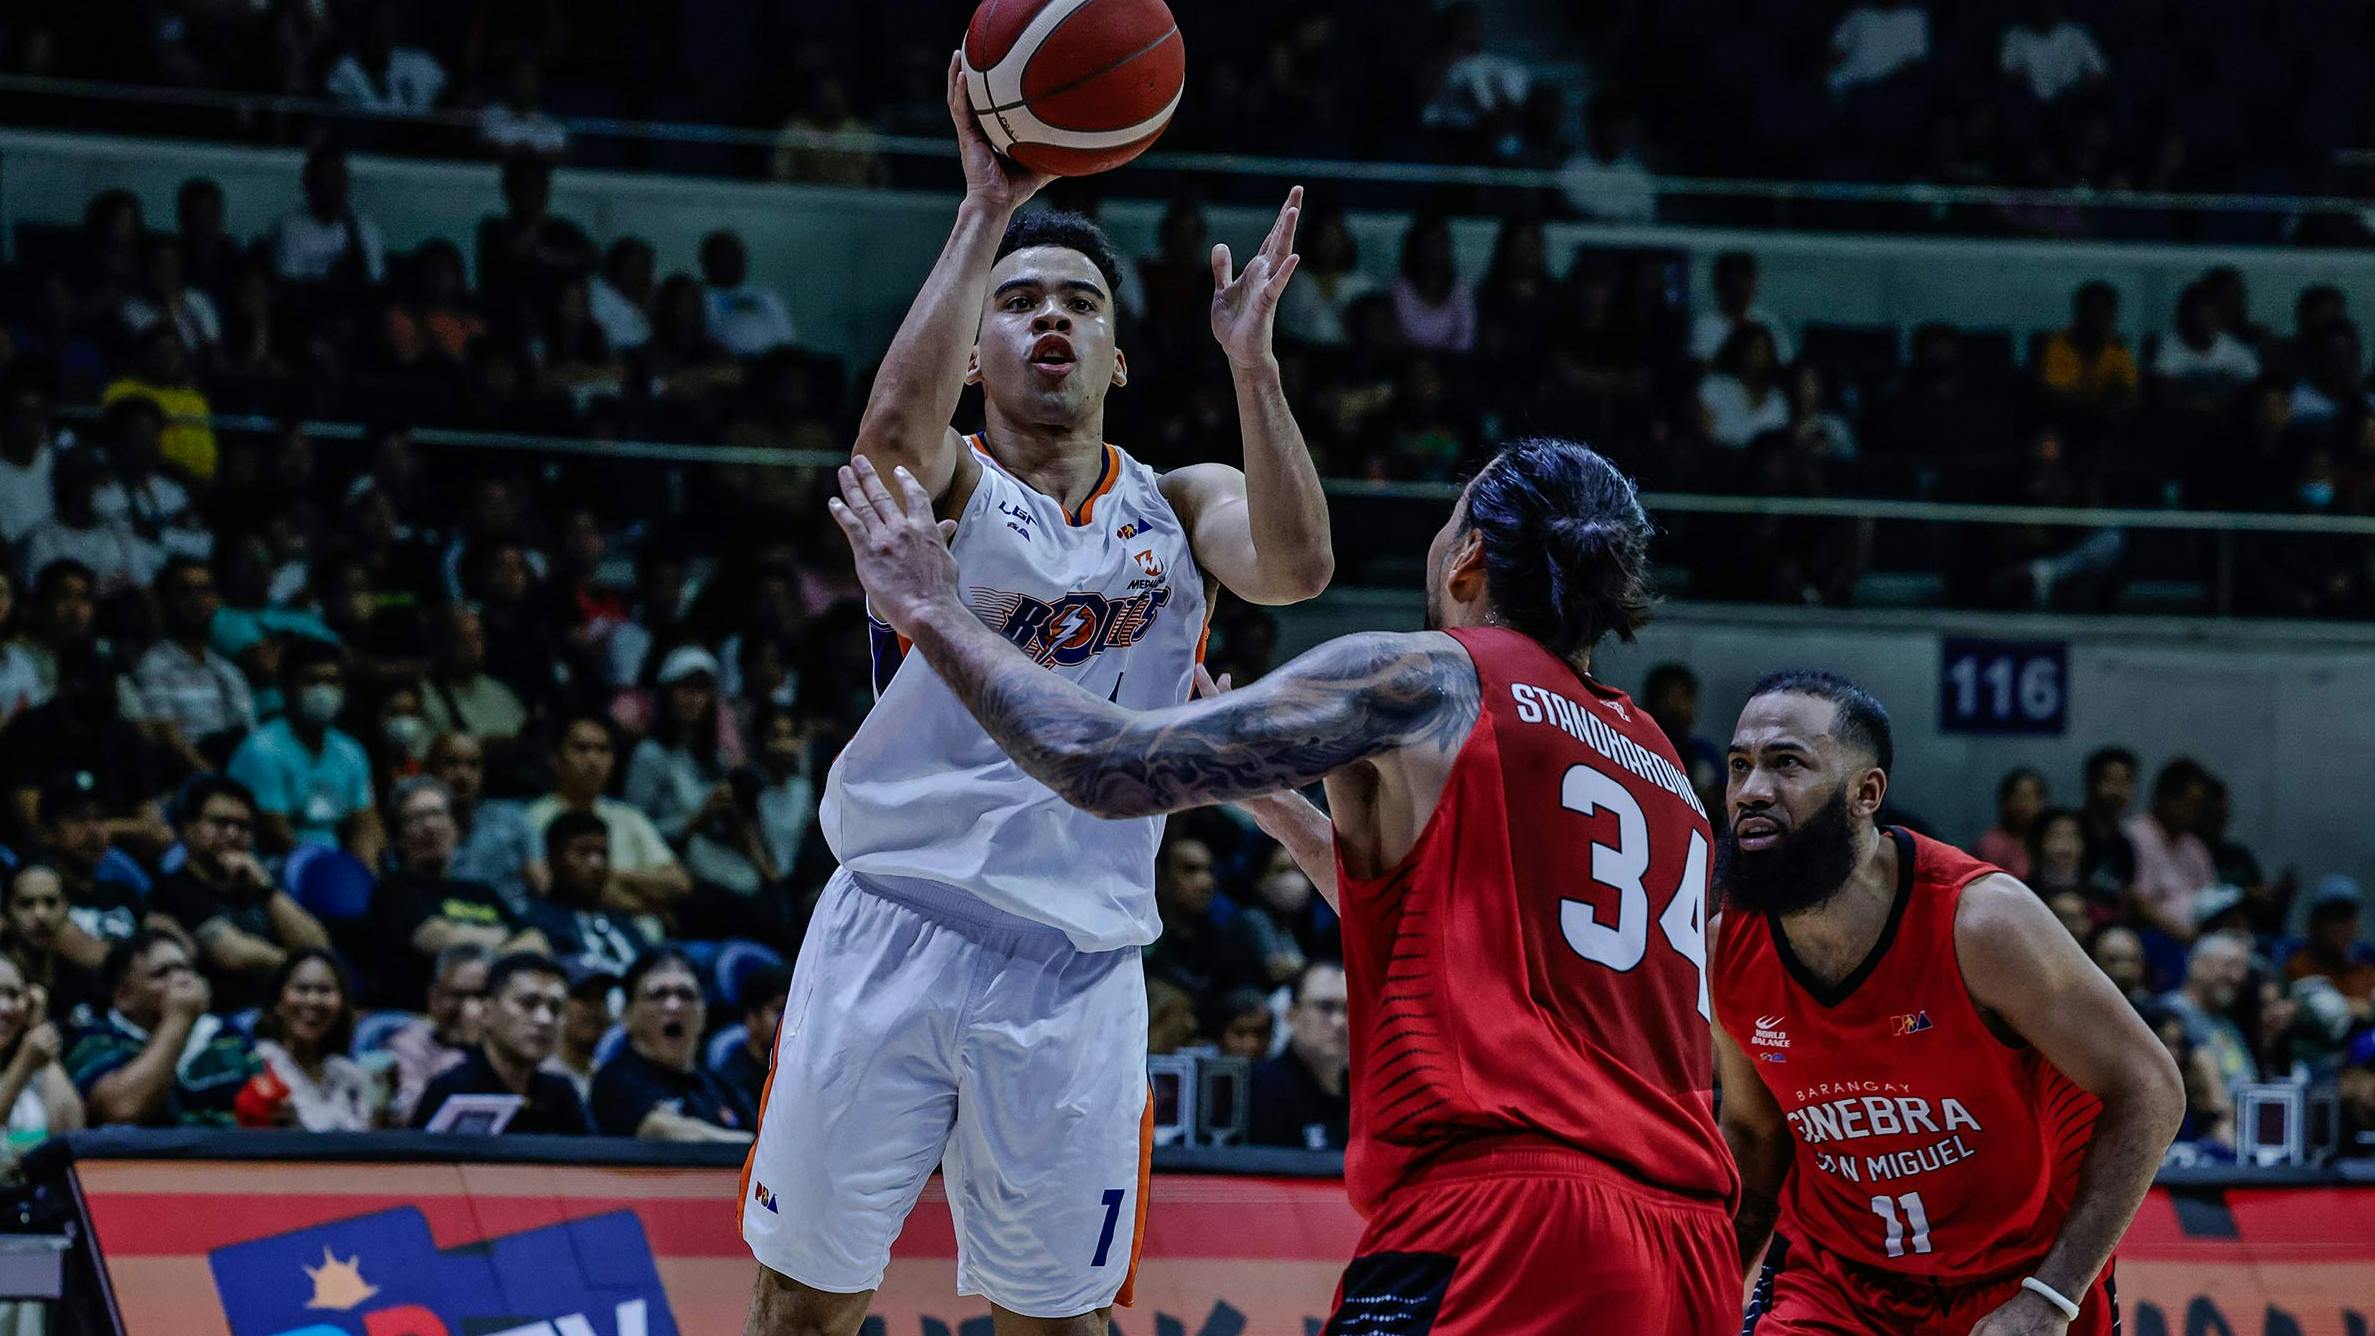 PBA: Meralco finds spark early, deals Ginebra first loss